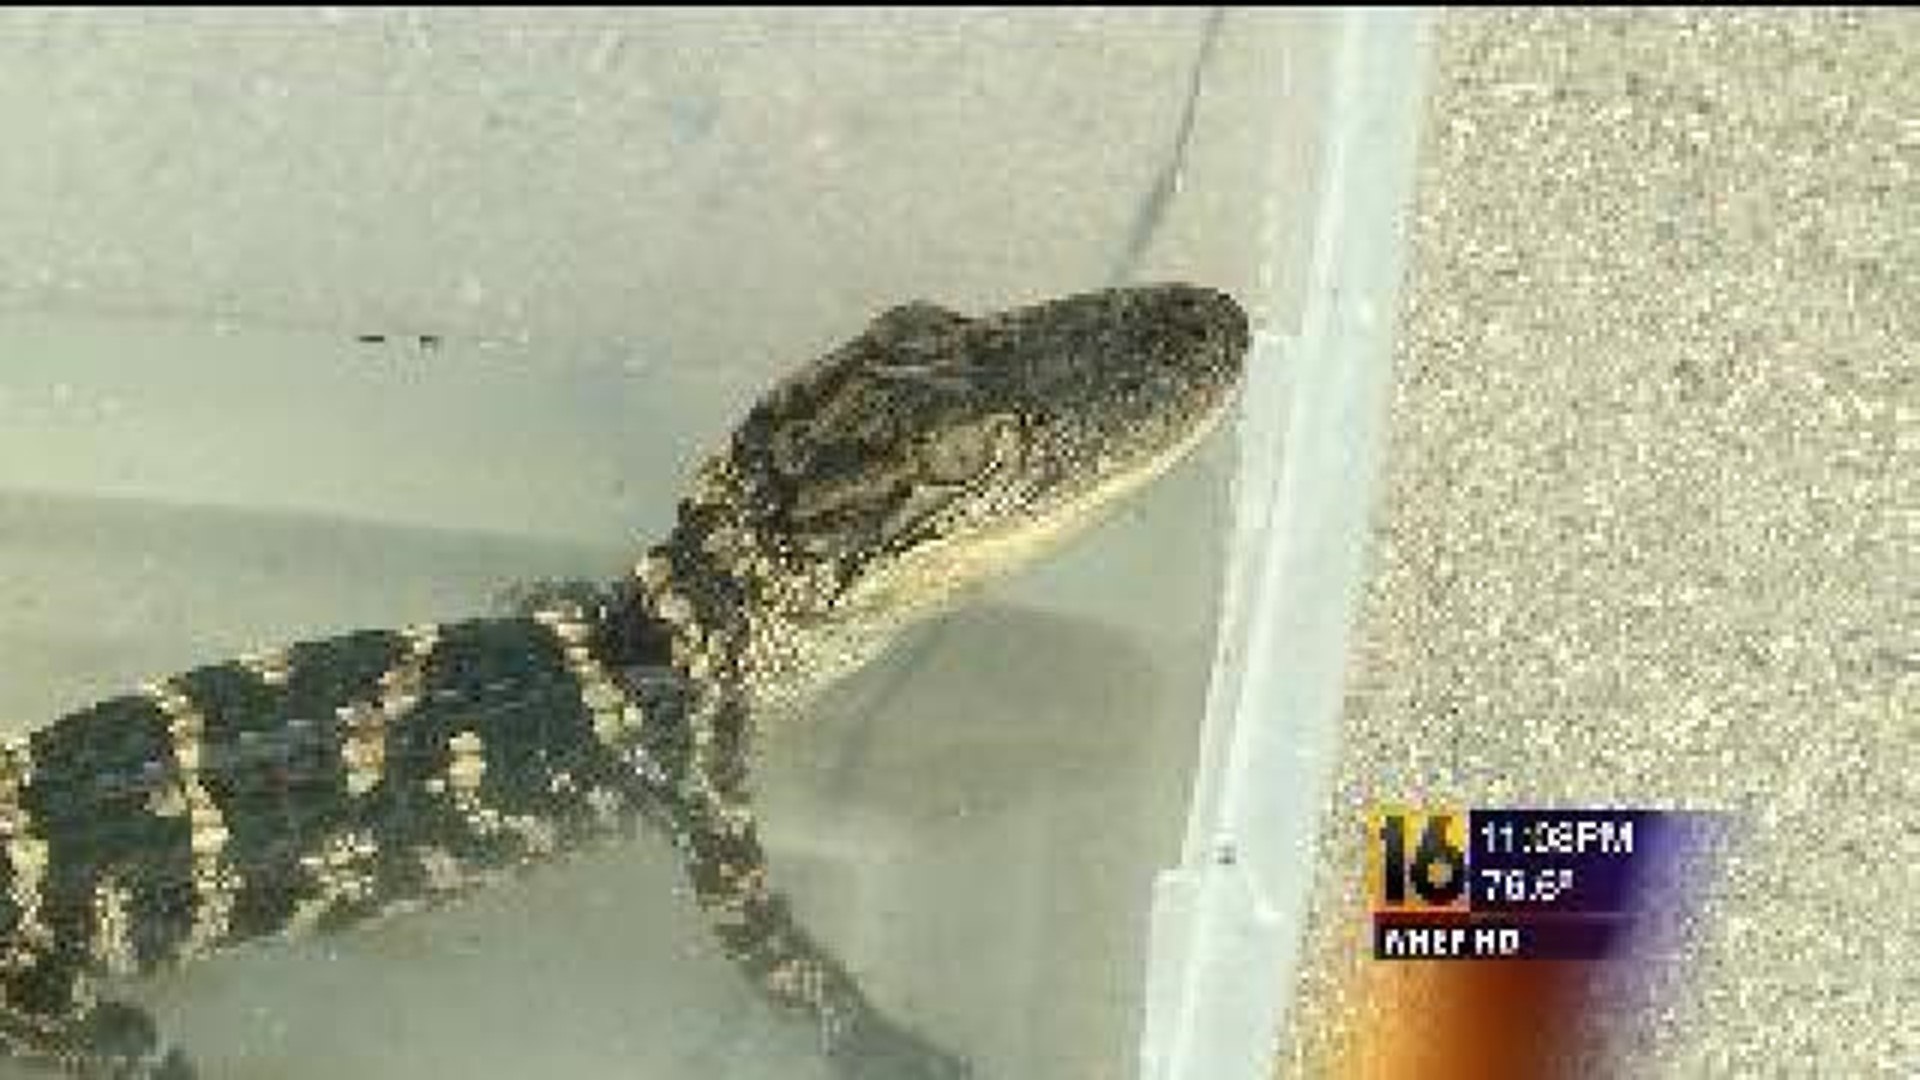 Alligator saved from fire